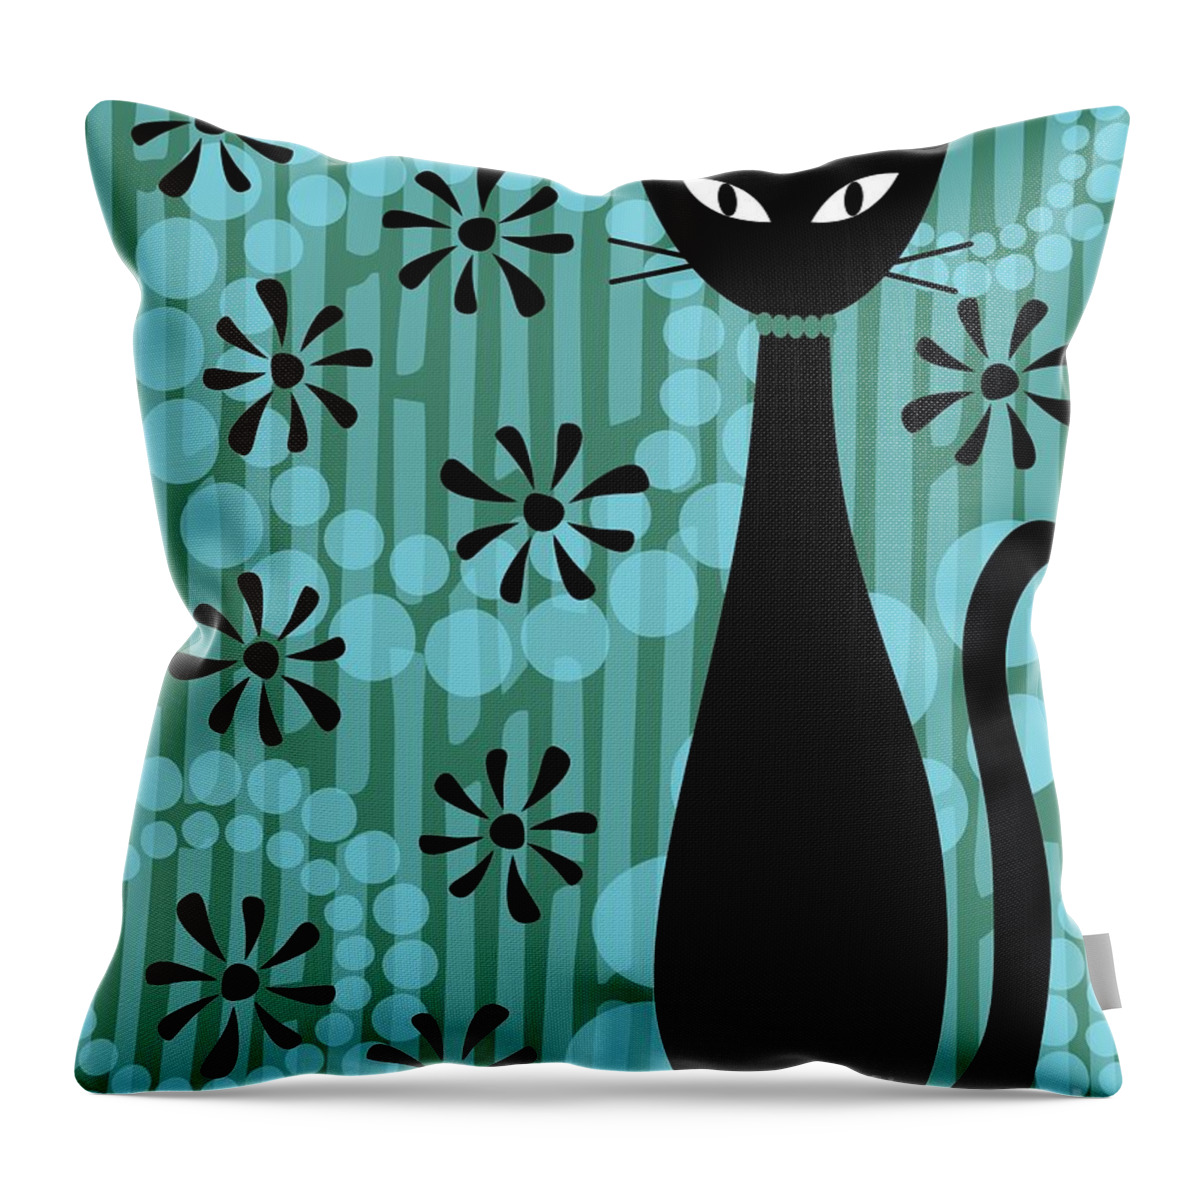 Abstract Cat Throw Pillow featuring the digital art Teal Mod Cat by Donna Mibus